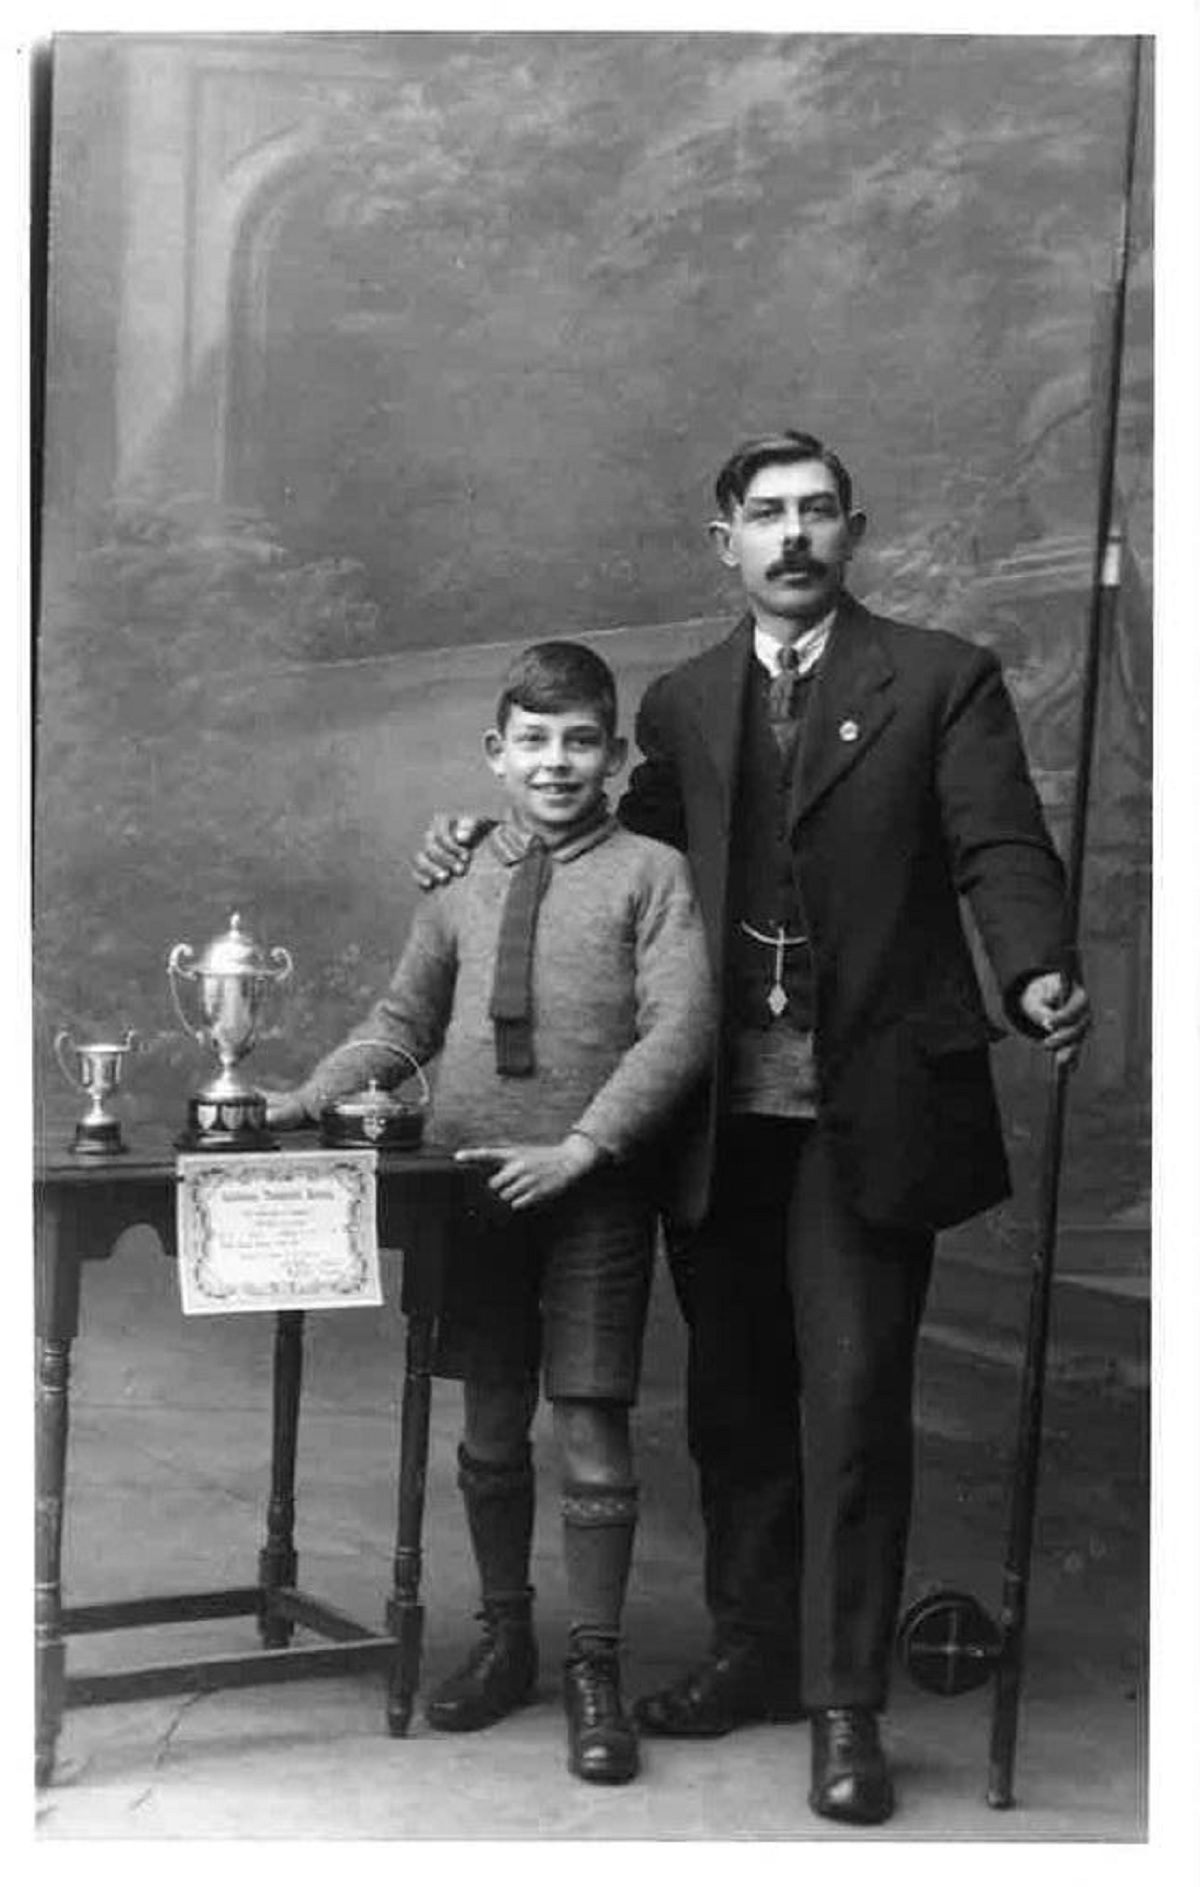 Prize time - Frank and George Hunnable are in this picture, with the Colchester Piscatorial Society trophy. It was taken in 1926/27